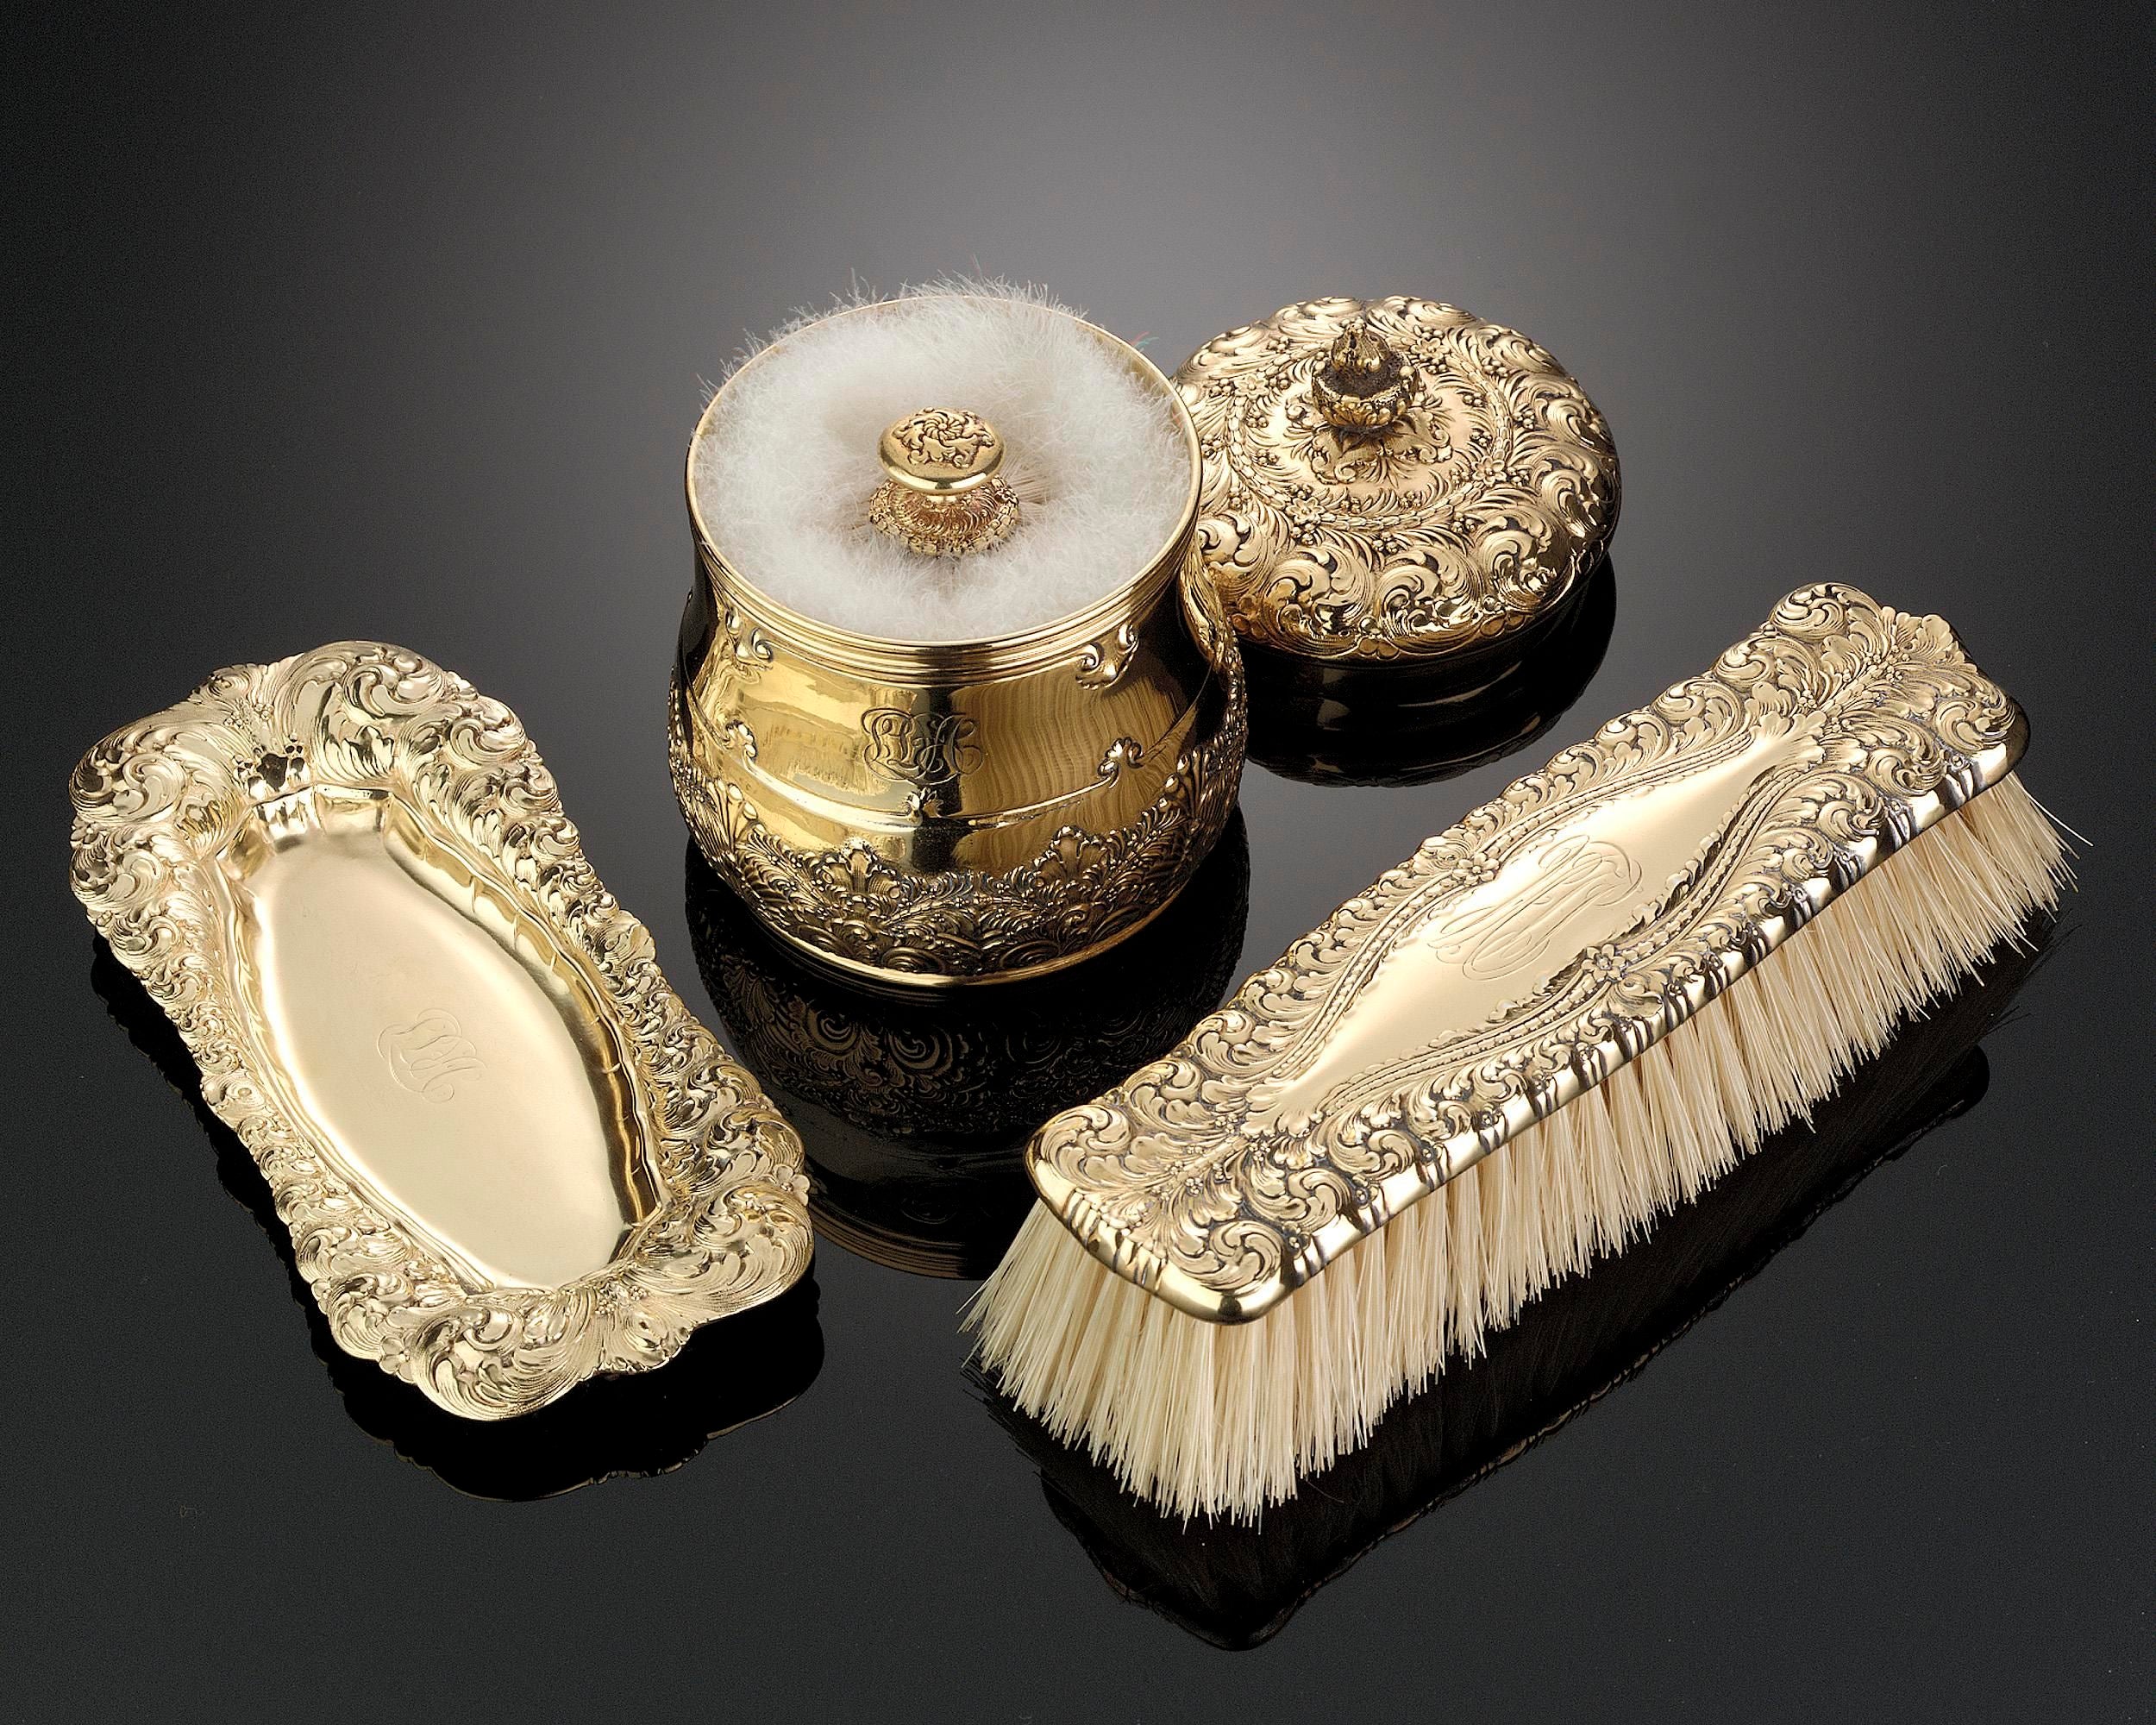 A lovely Tiffany silver gilt dresser set complete with a brush, powder jar and tray wonderfully decorated with elaborate foliate borders. Date marked 1891-1902. Tiffany Silver. Excellent condition.
Measures:
Brush: 2” wide x 7” long.
Powder: 3”